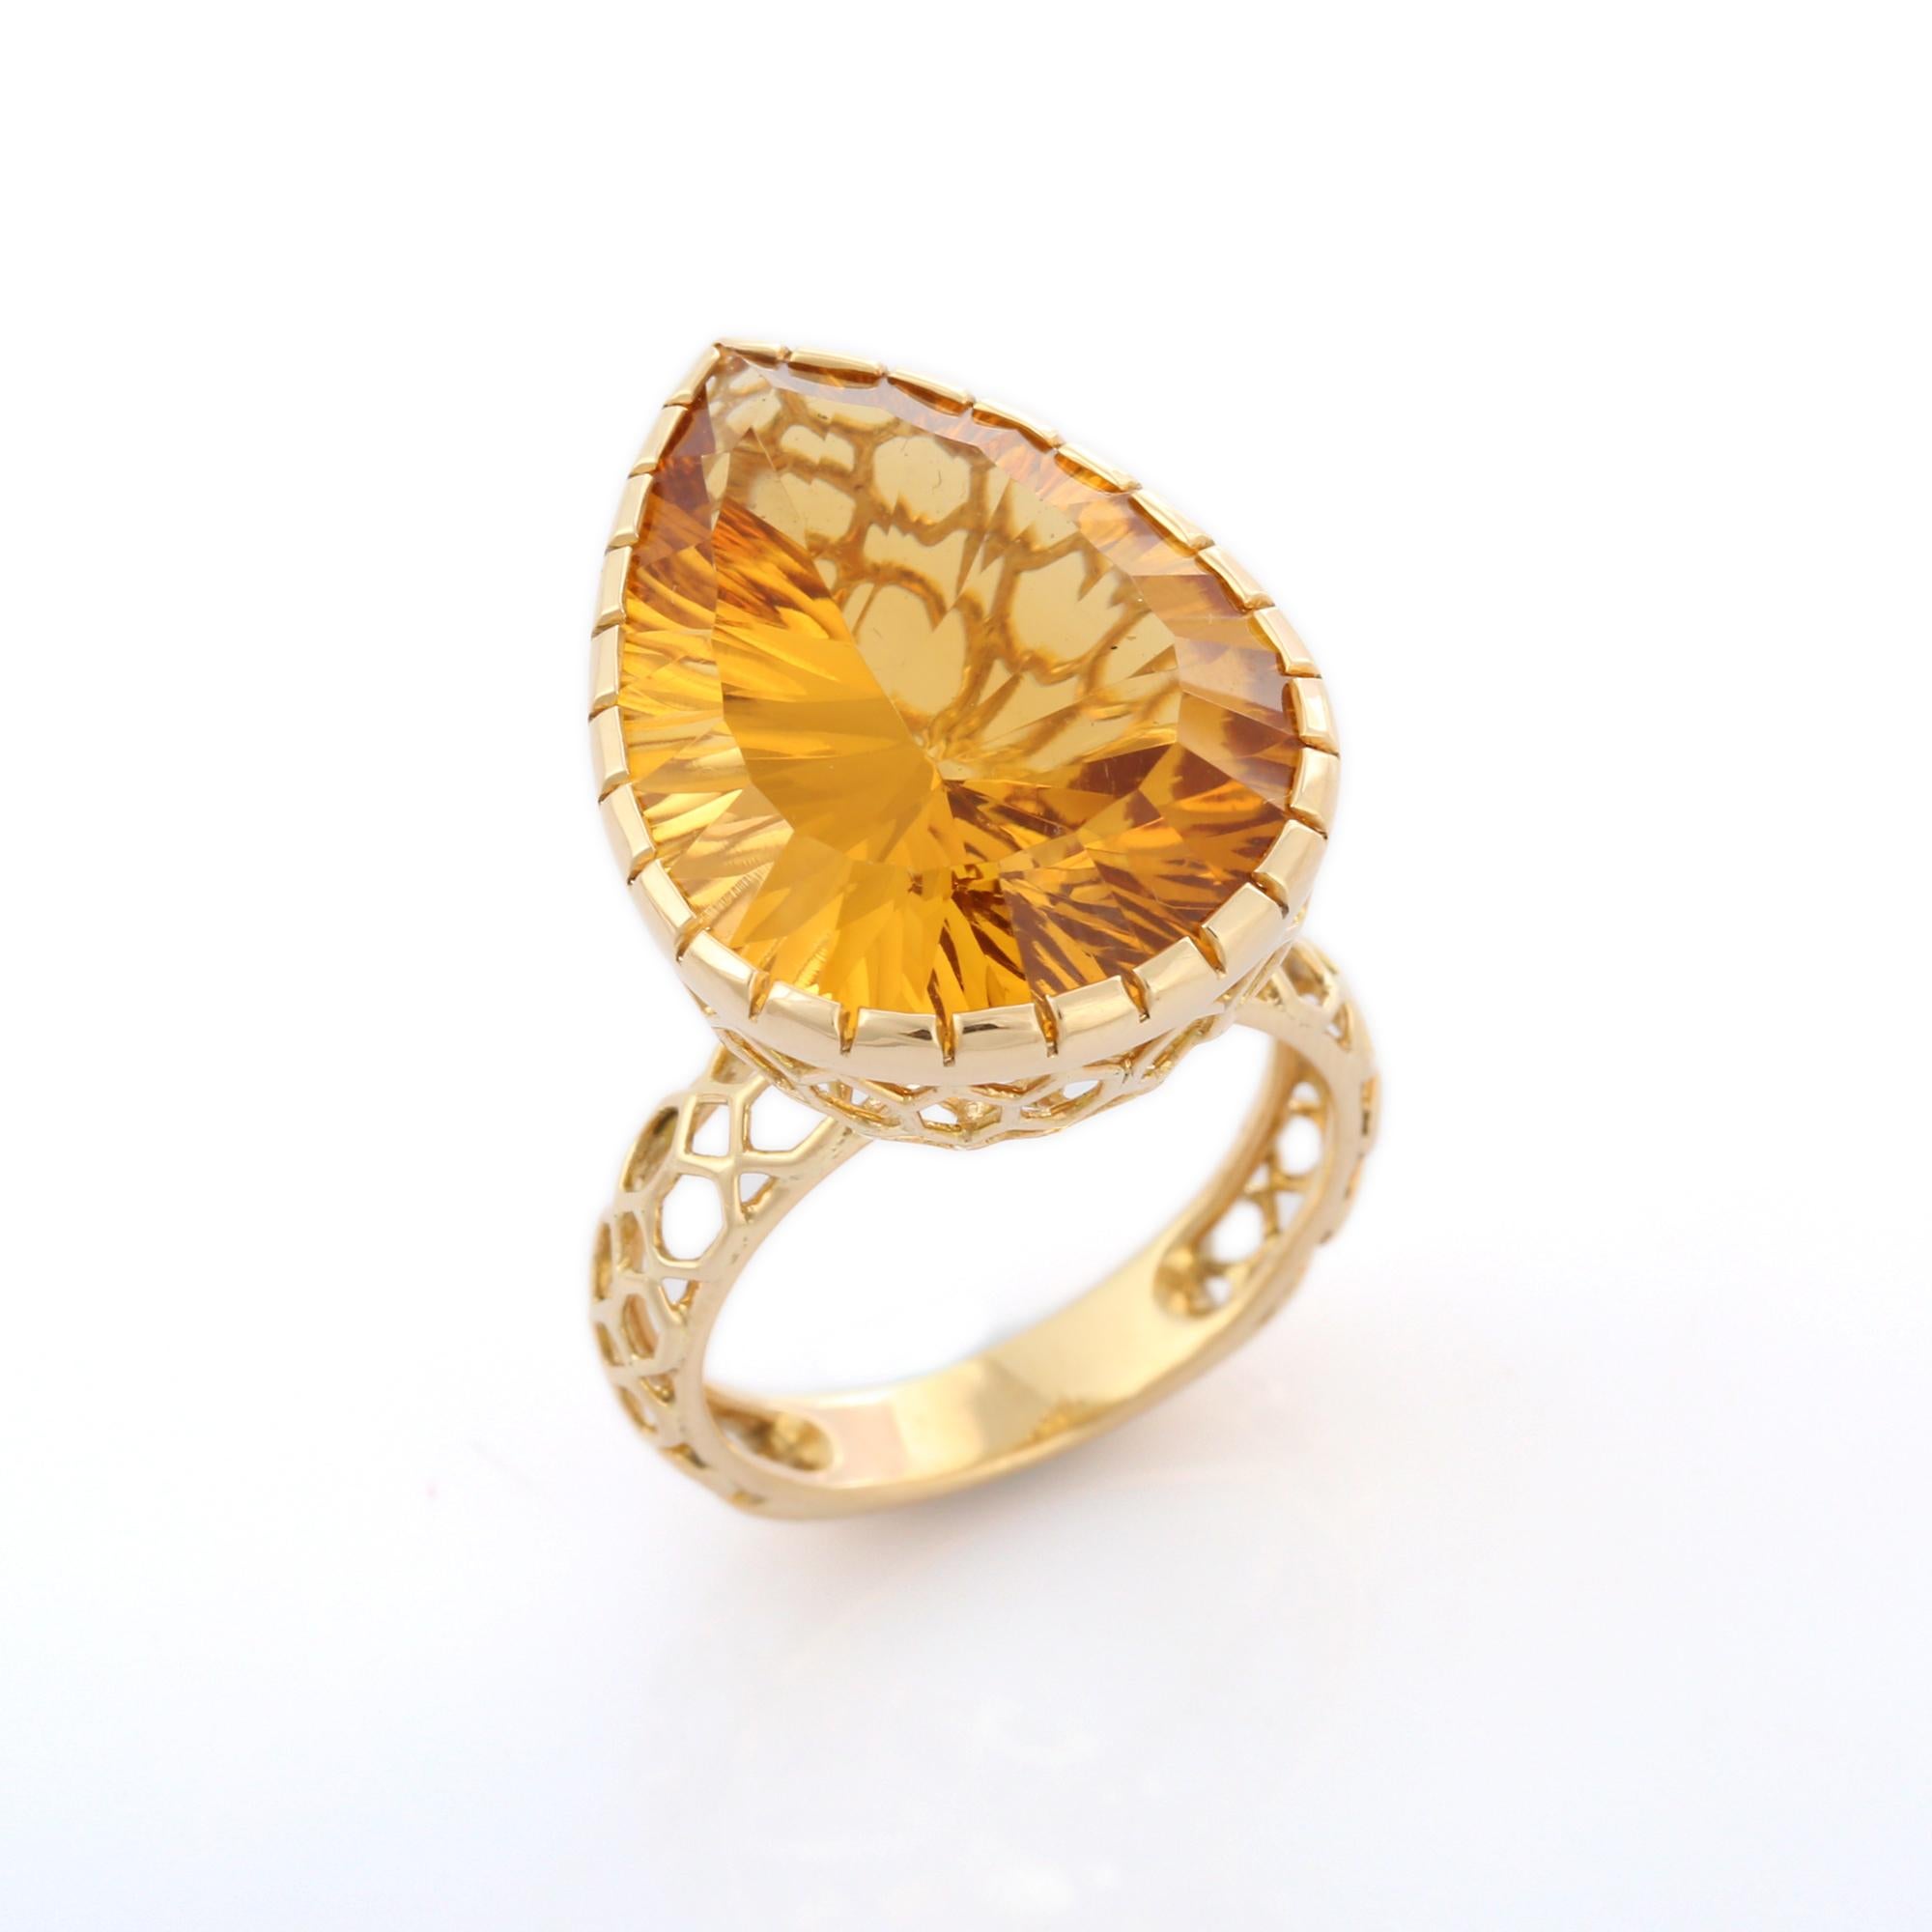 For Sale:  17.95 Carat Citrine Pear Cut Cocktail Ring in 14K Yellow Gold 4